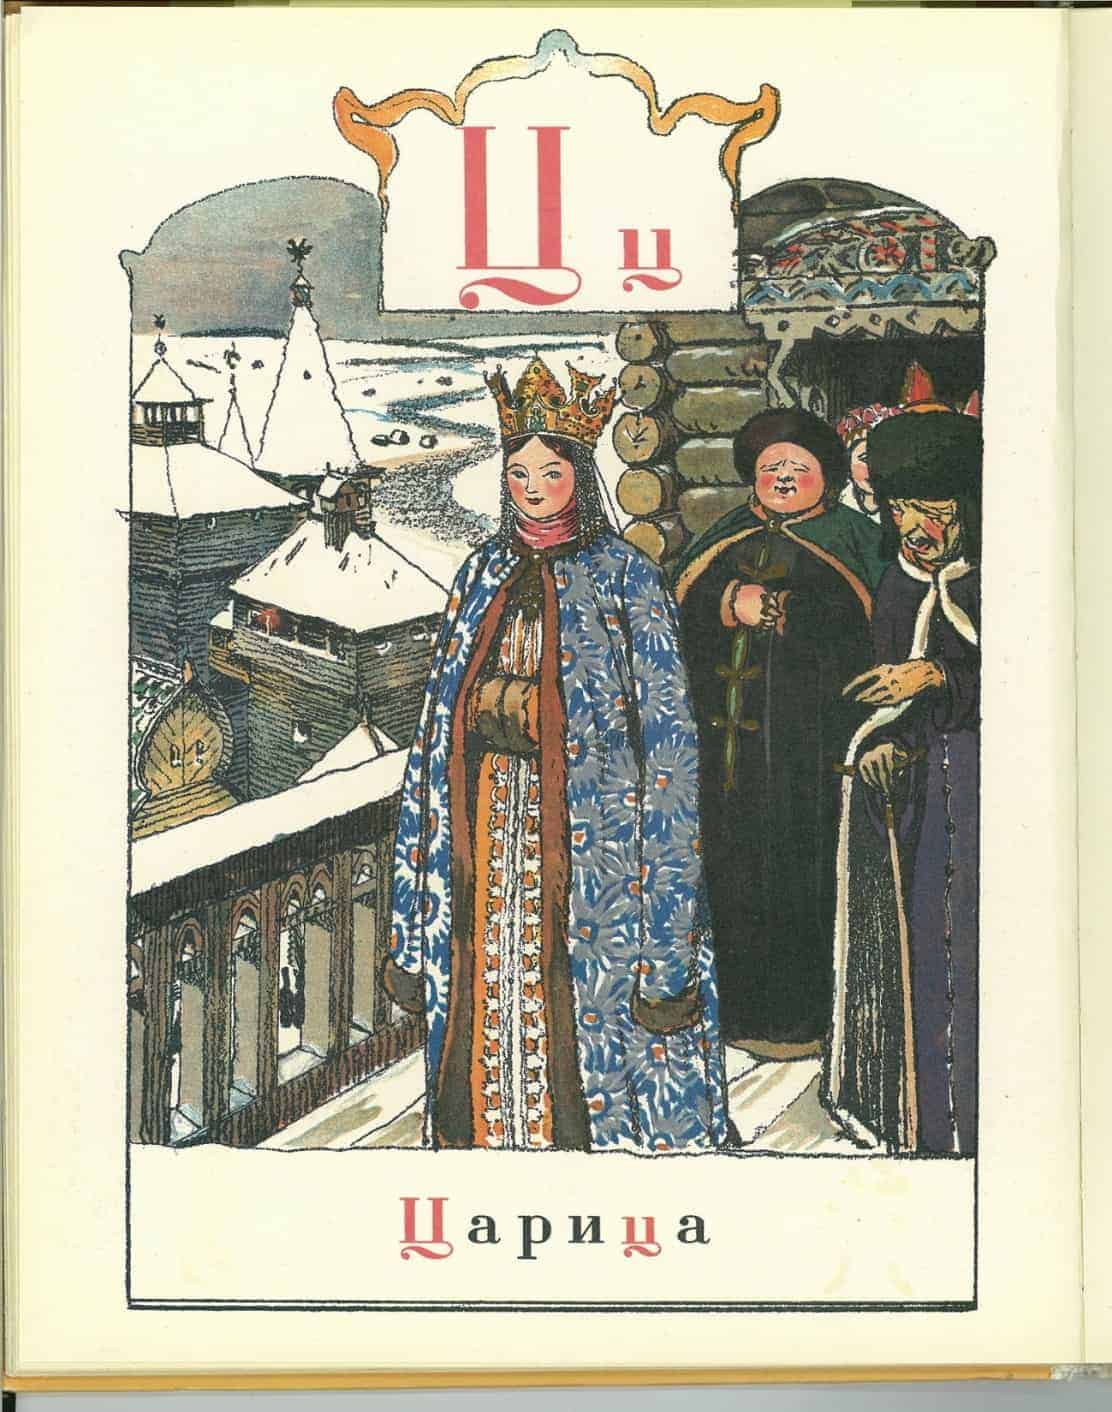 A page from Alexander Benois’ Alphabet Book in Pictures, depicting Tzaritsa, the wife of the Tzar